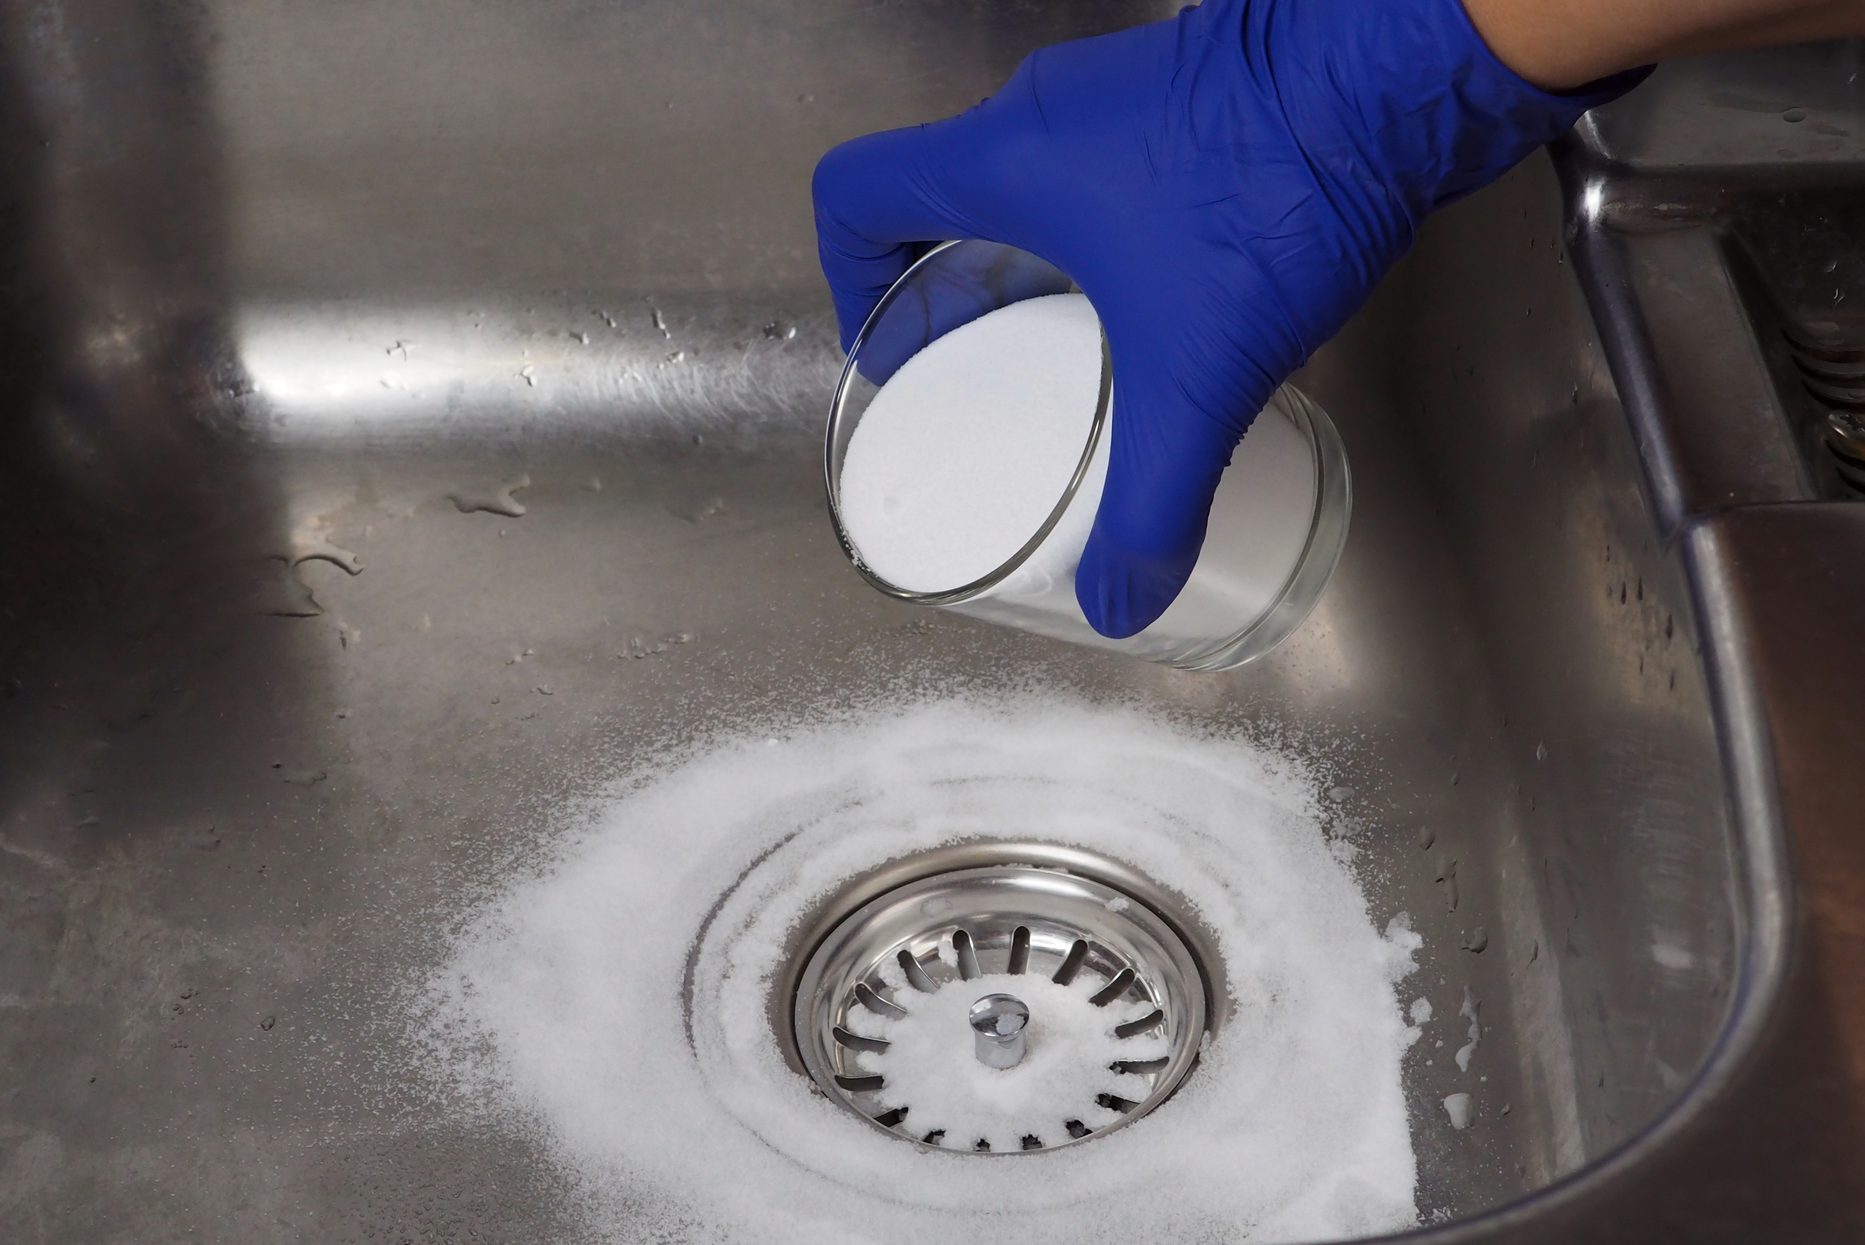 10 Quick Ways to Clean a Kitchen Sink Drain  Baking powder for cleaning,  Baking powder uses, Baking soda cleaning